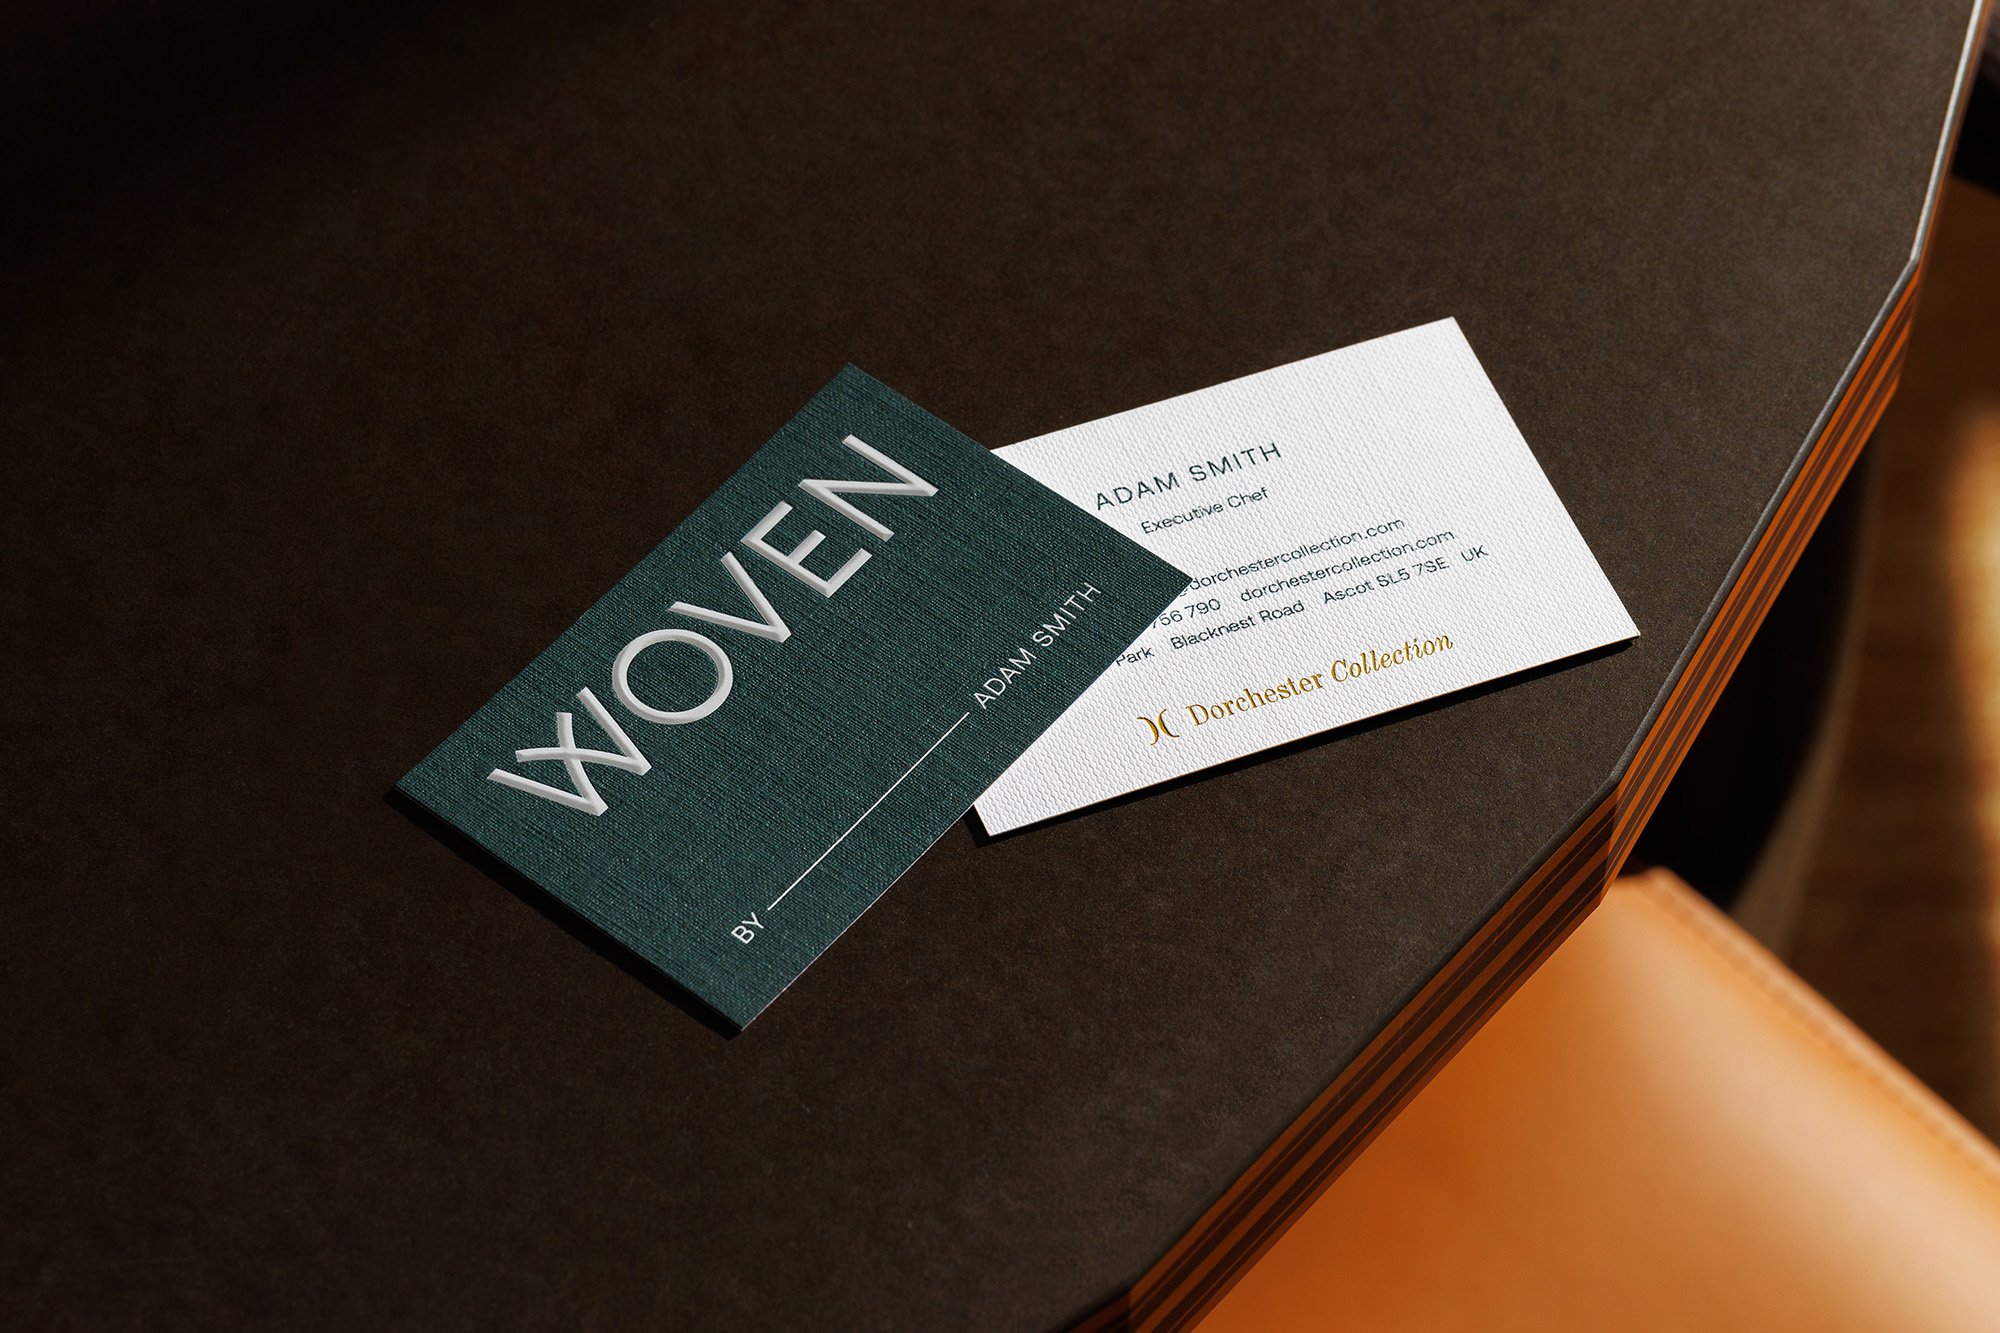 Logotype, signage and menu design for Woven, a Michelin star restaurant owned by the Dorchester Collection